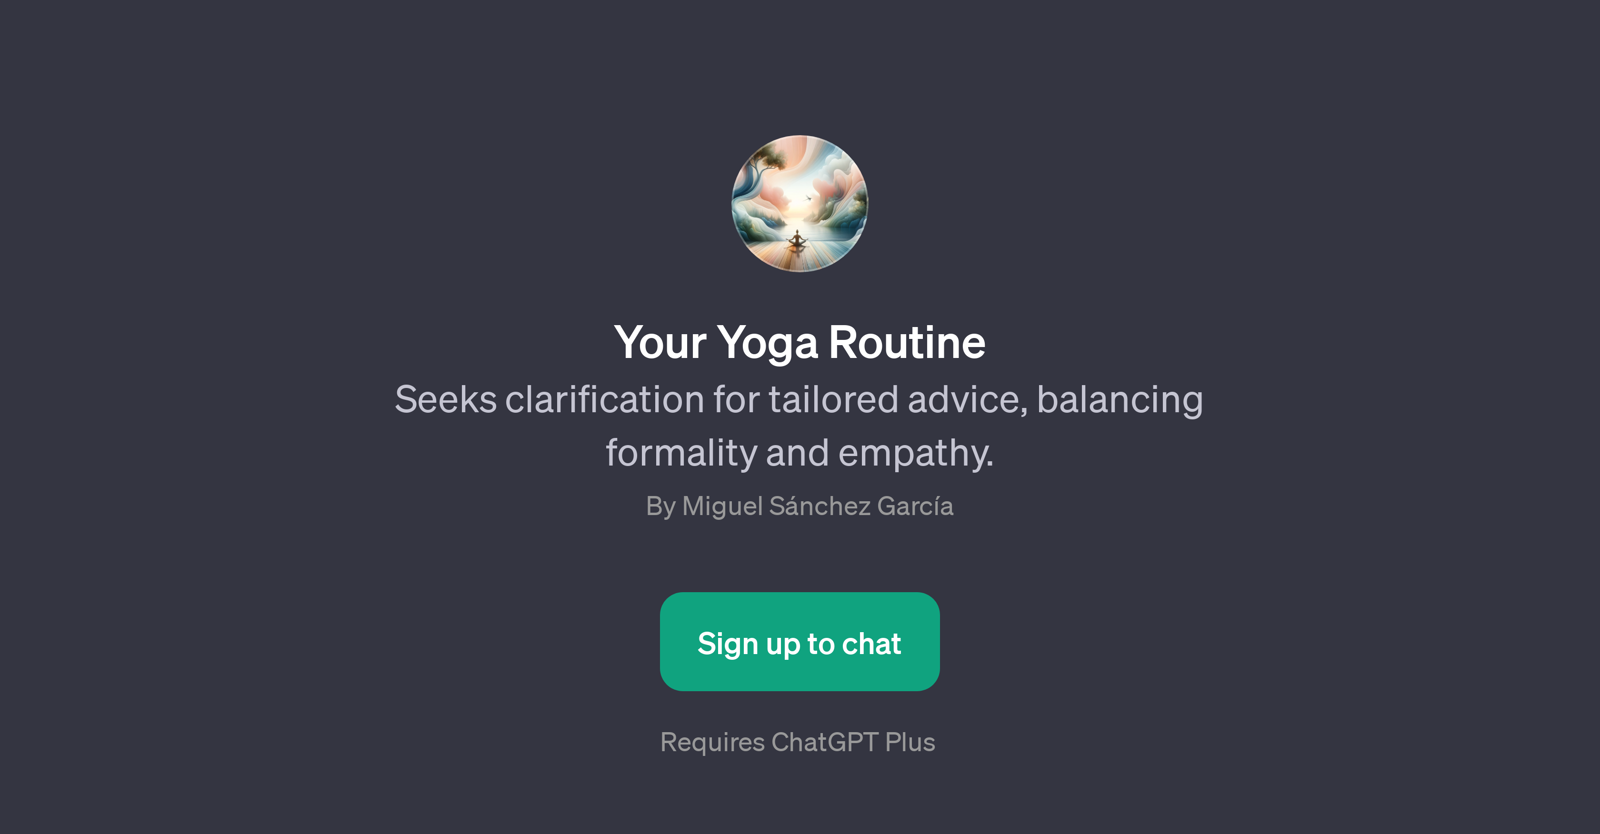 Your Yoga Routine website